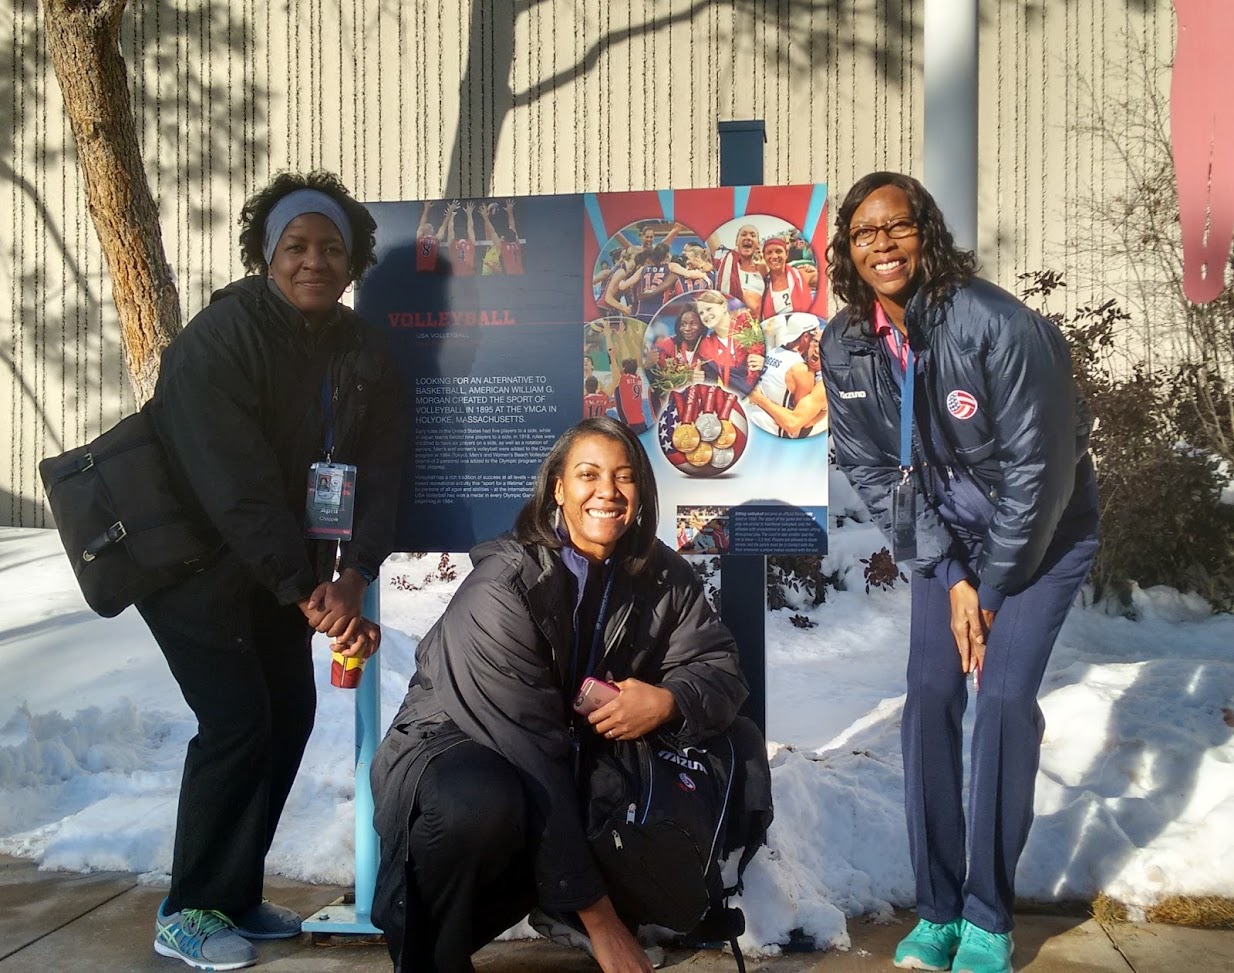 Former teammates two time Olympic team captain bronze medalist Kim Oden and five time Olympian, bronze and silver medalist Danielle Scott Arruda at the US Olympic Training Center